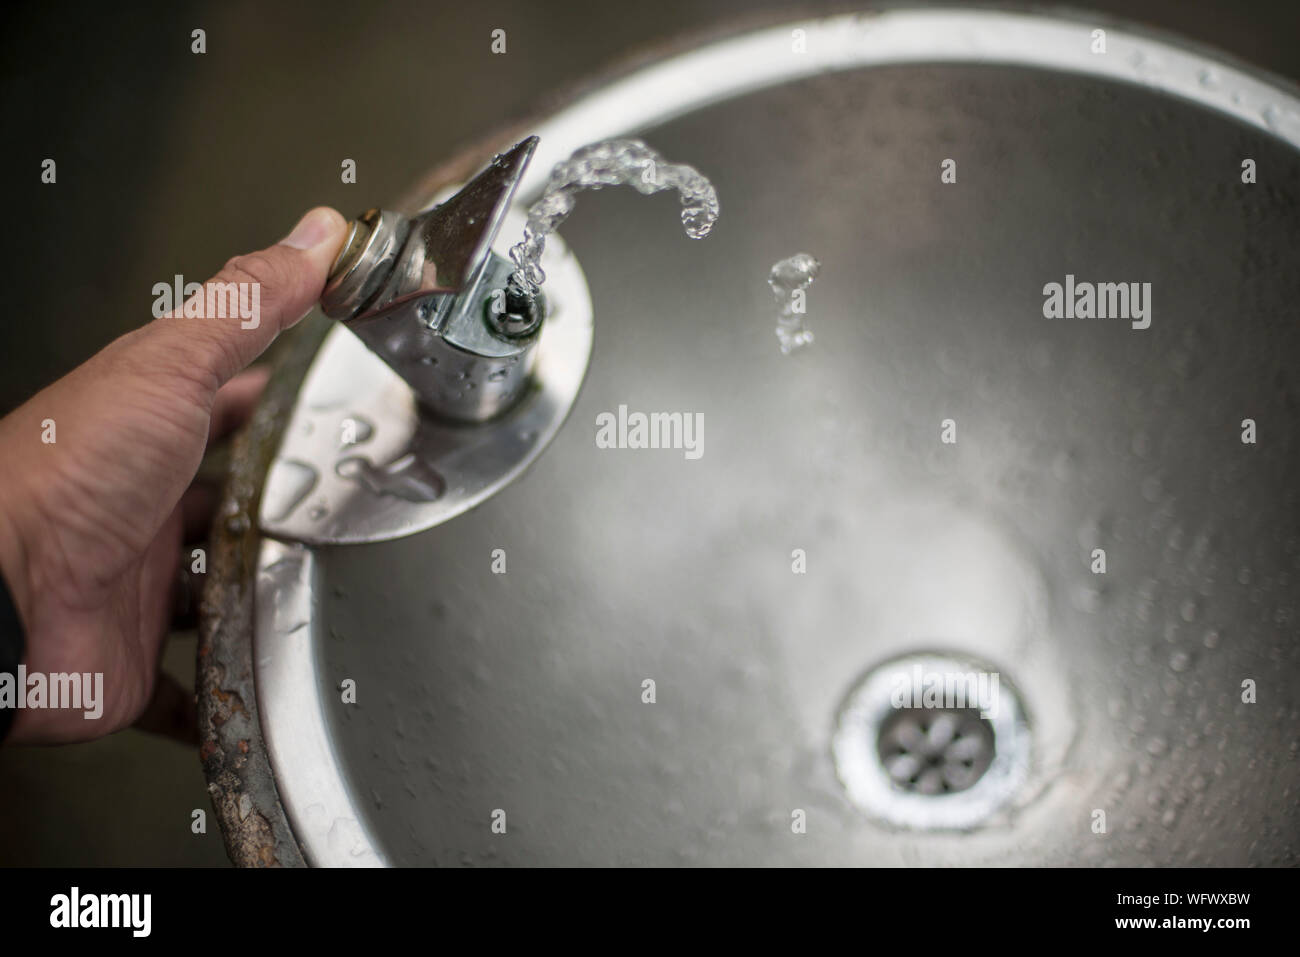 Cropped Hand Pressing Faucet Button Of Drinking Fountain Stock Photo